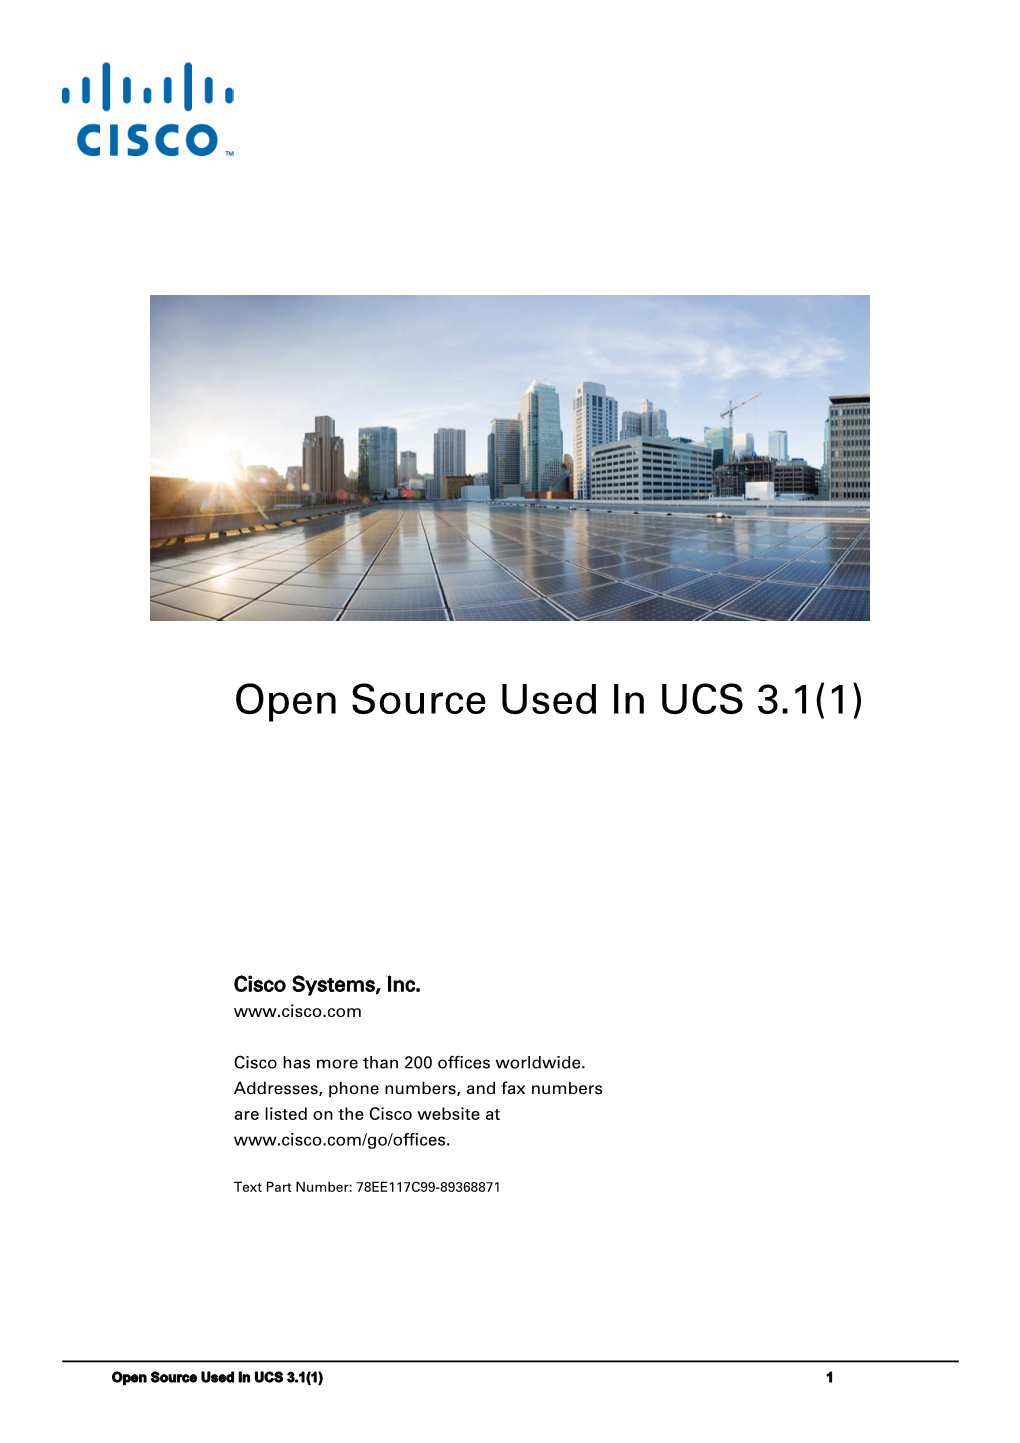 Open Source Used in Cisco UCS 3.1(1)